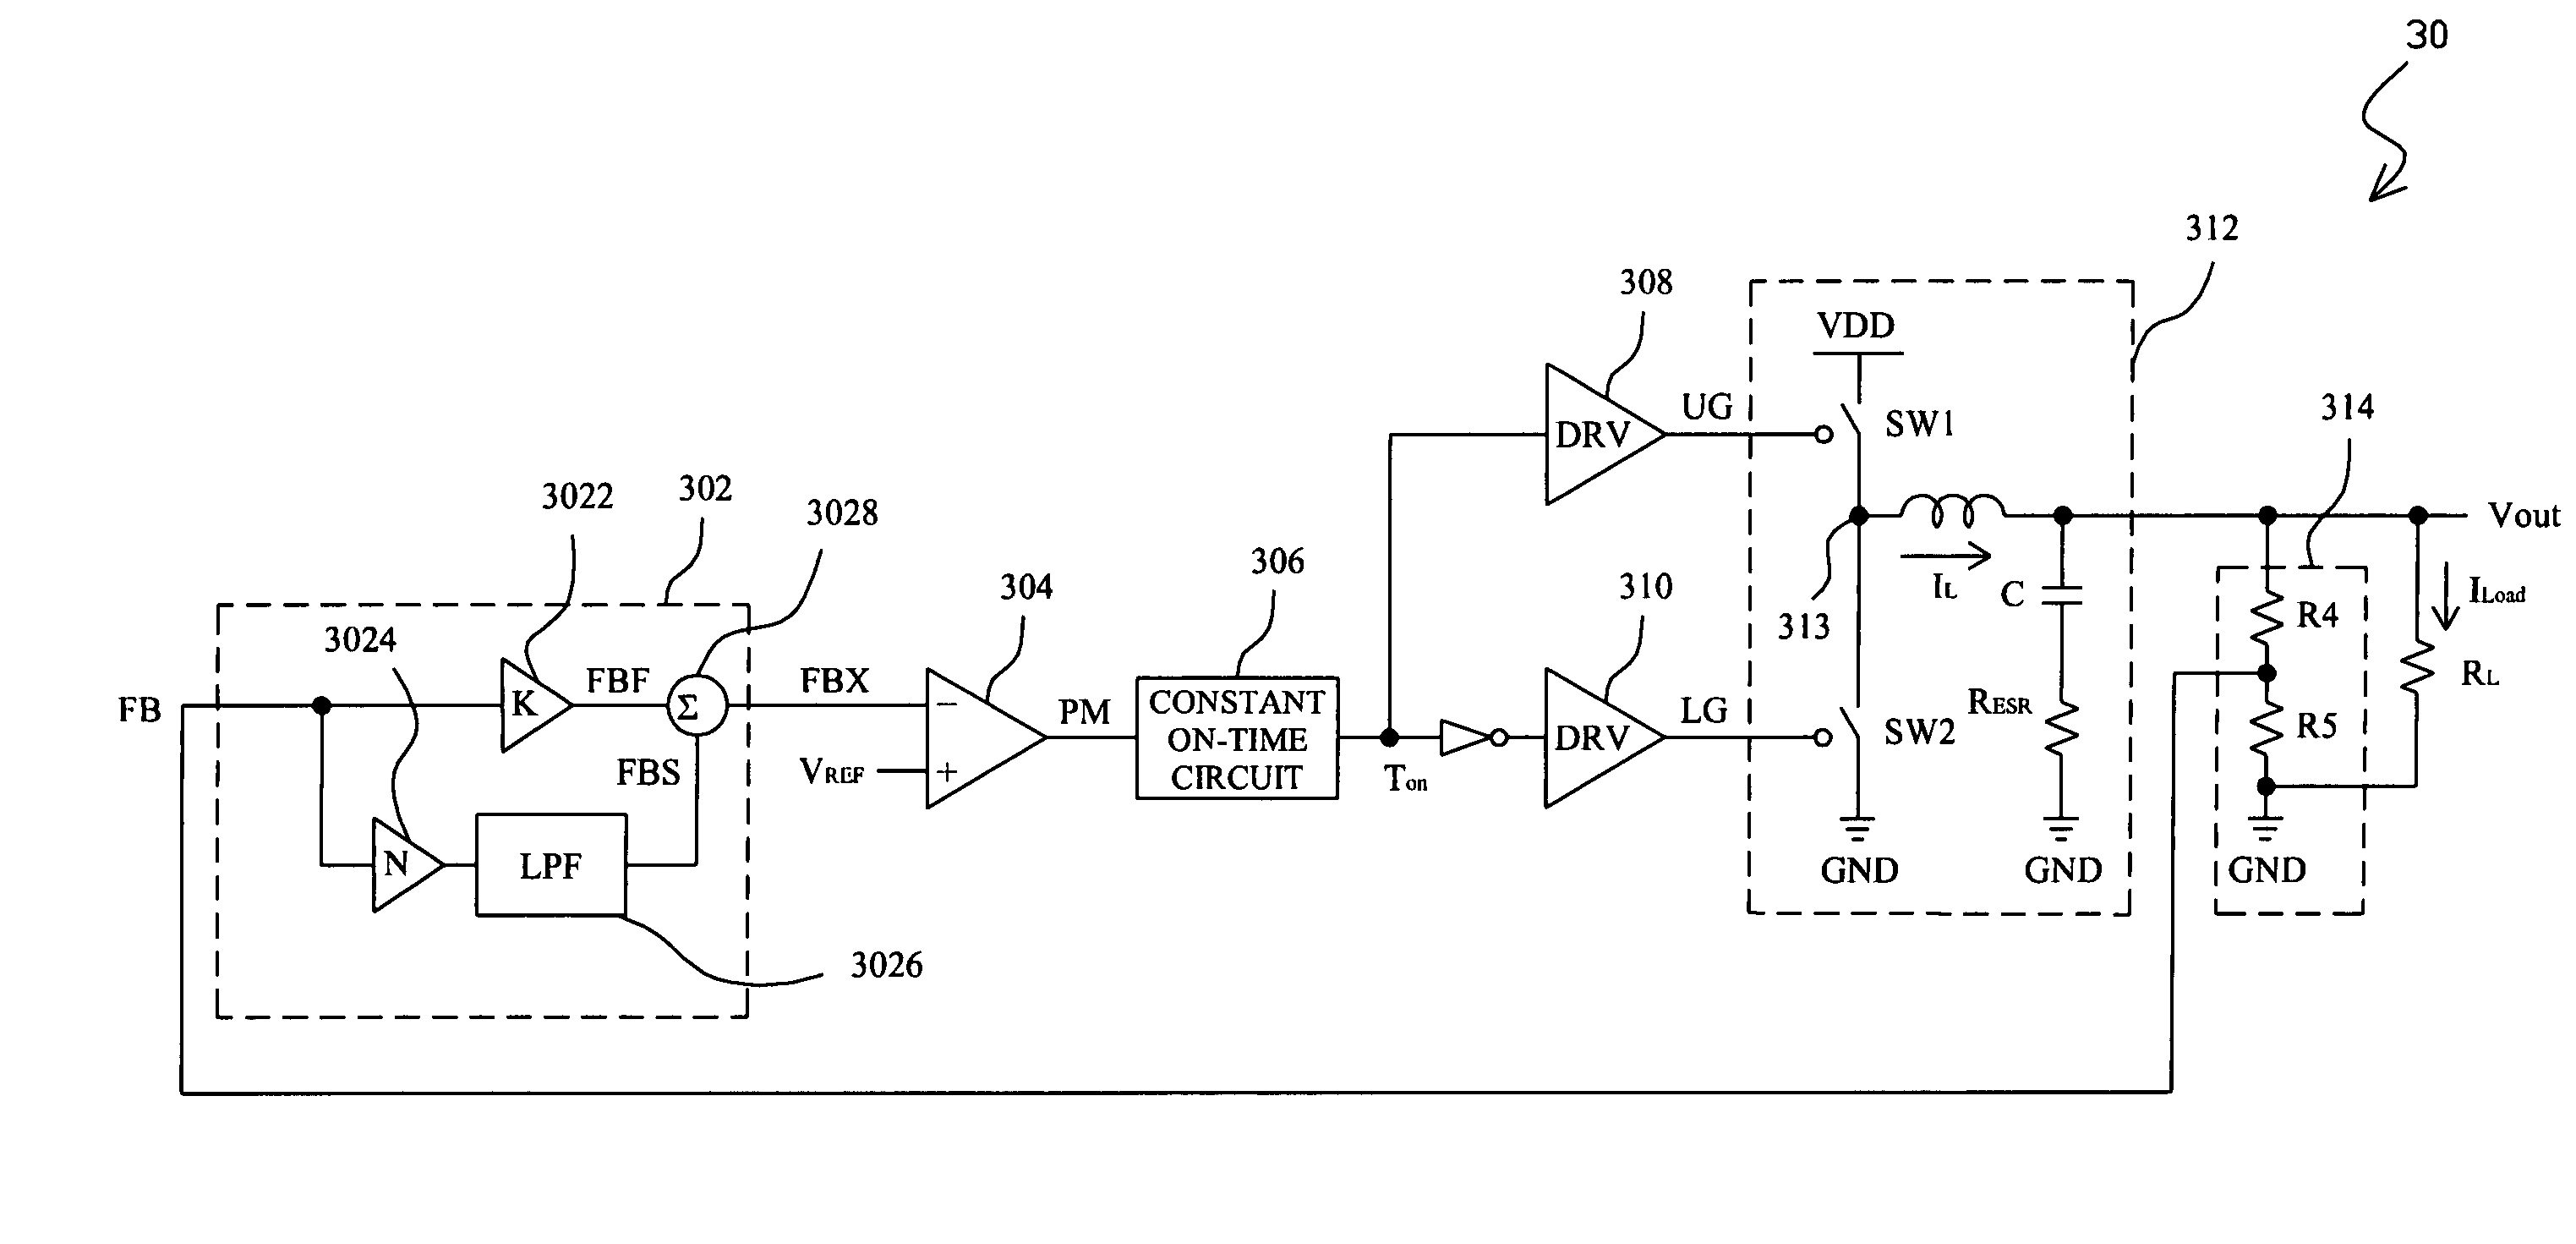 Apparatus and method for noise sensitivity improvement to a switching system